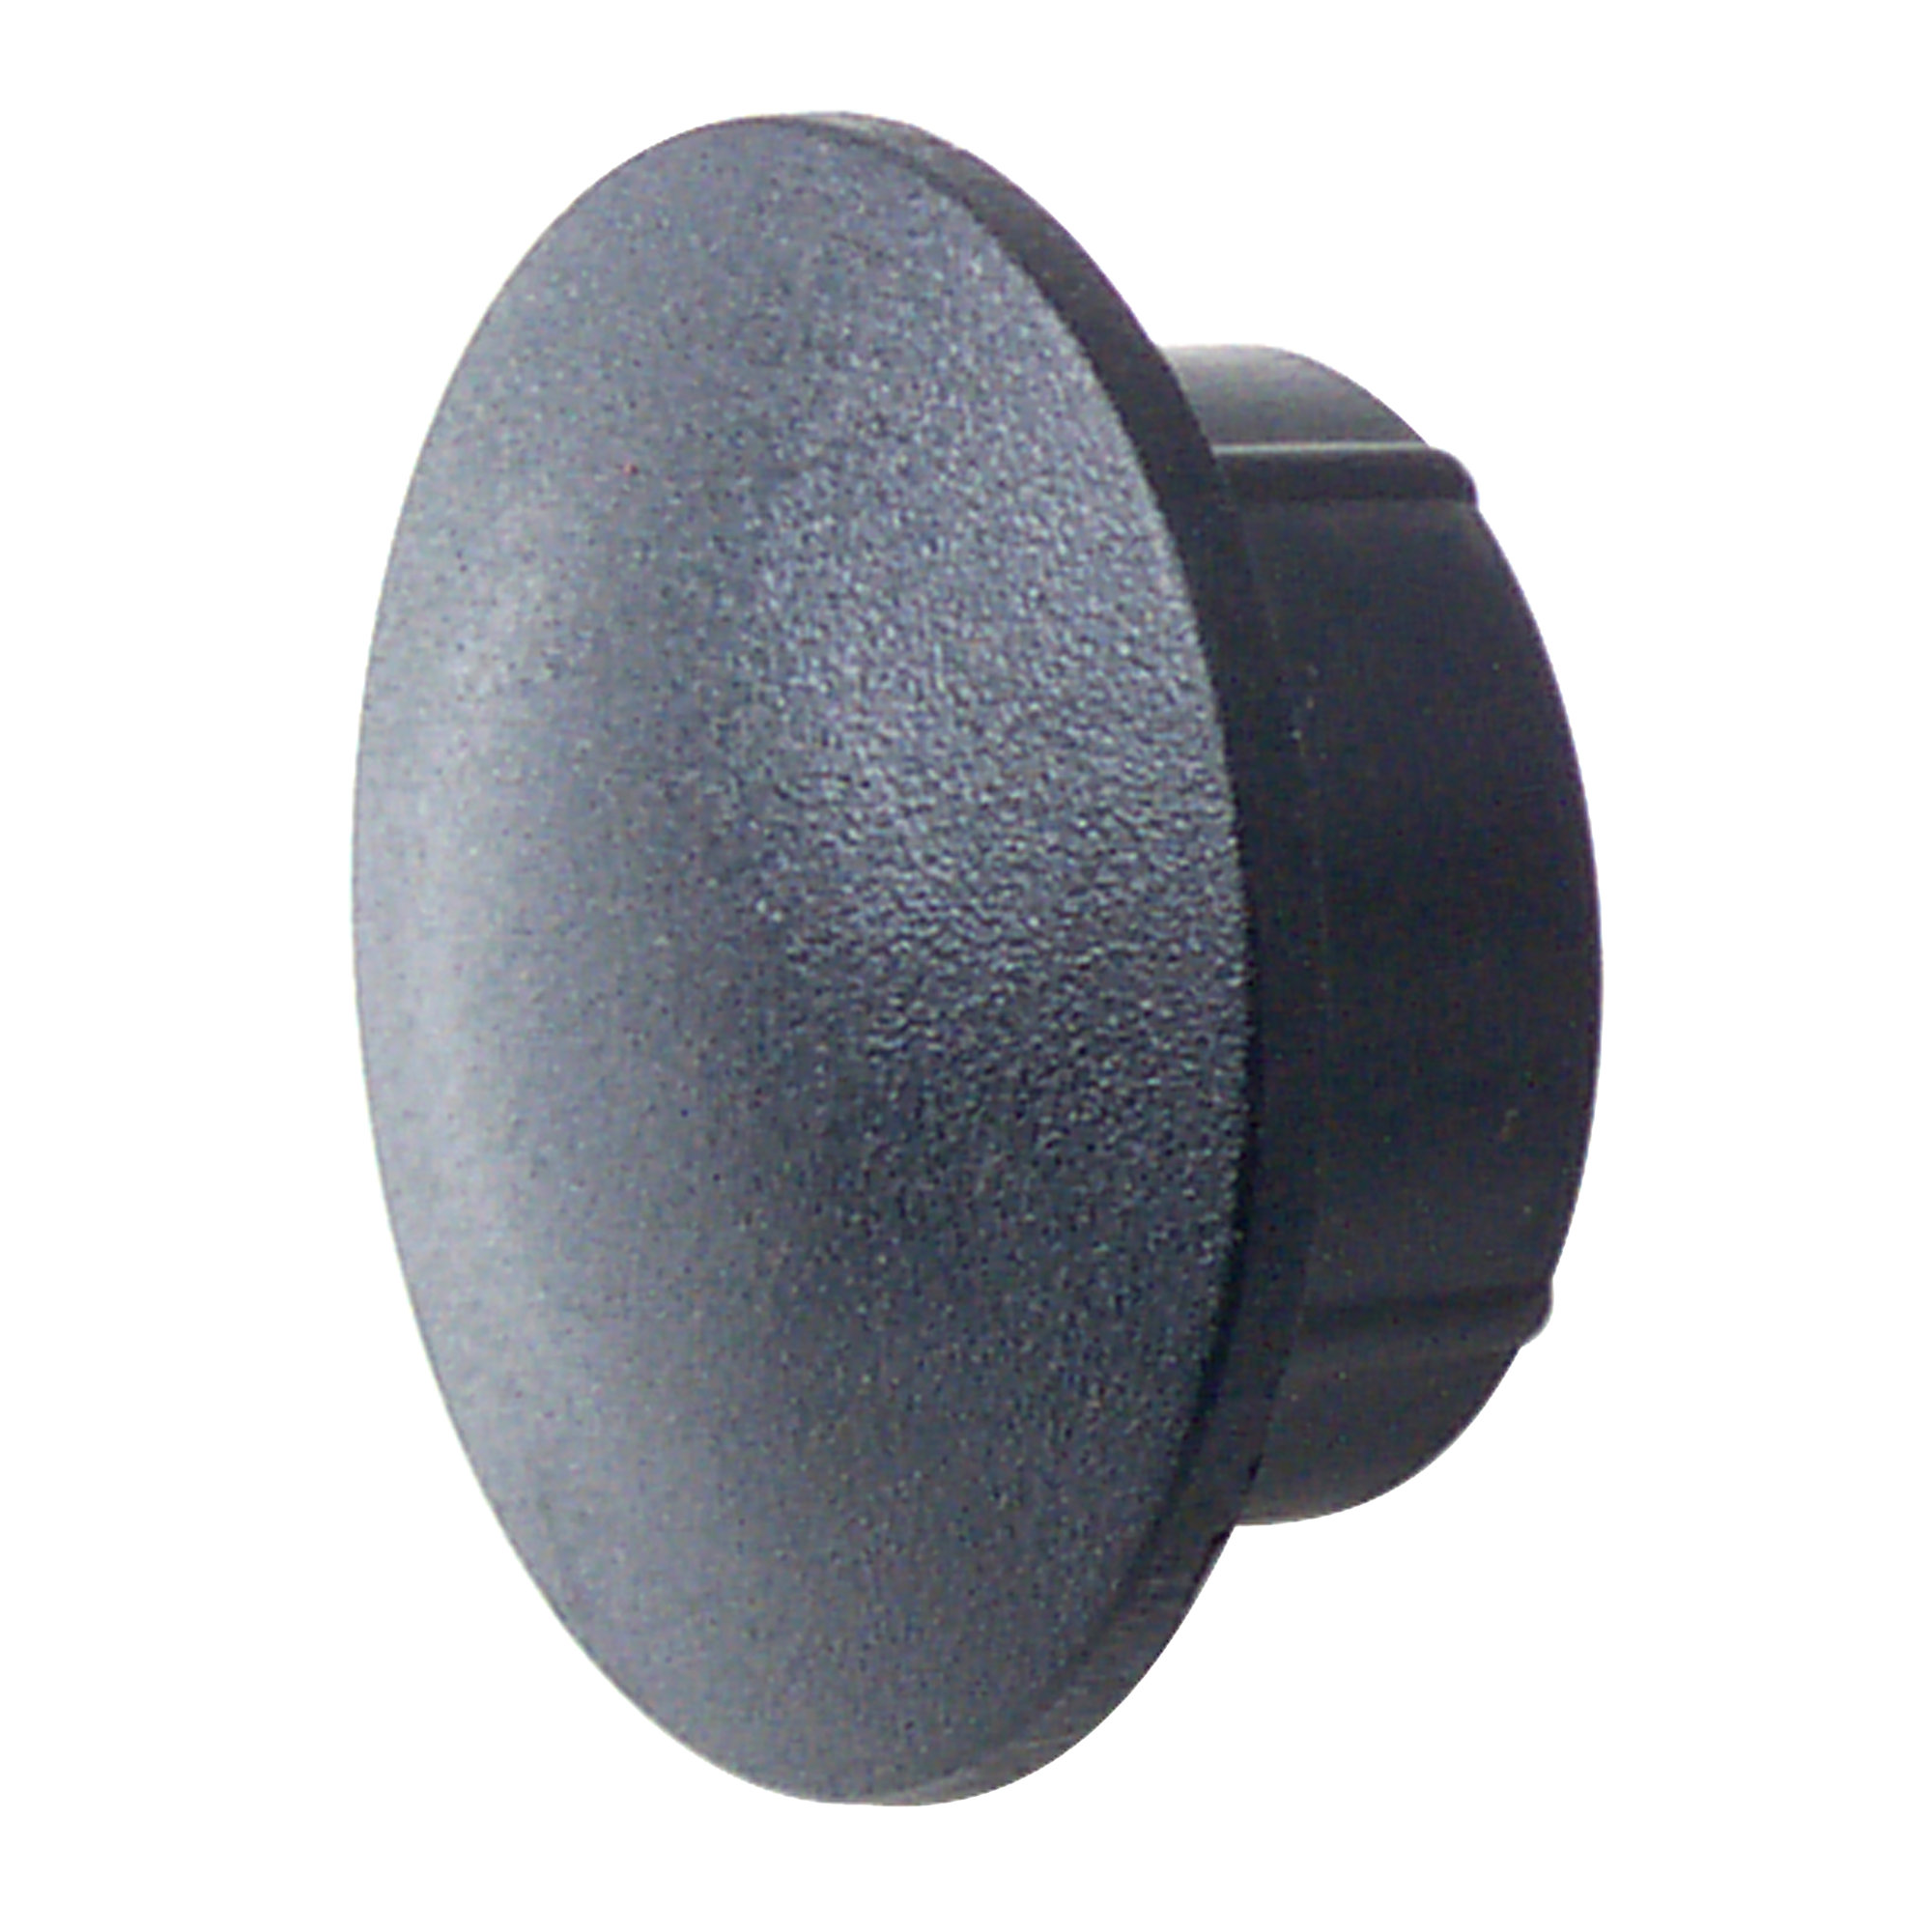 Plug End Cap to HR Handlebar and Grips